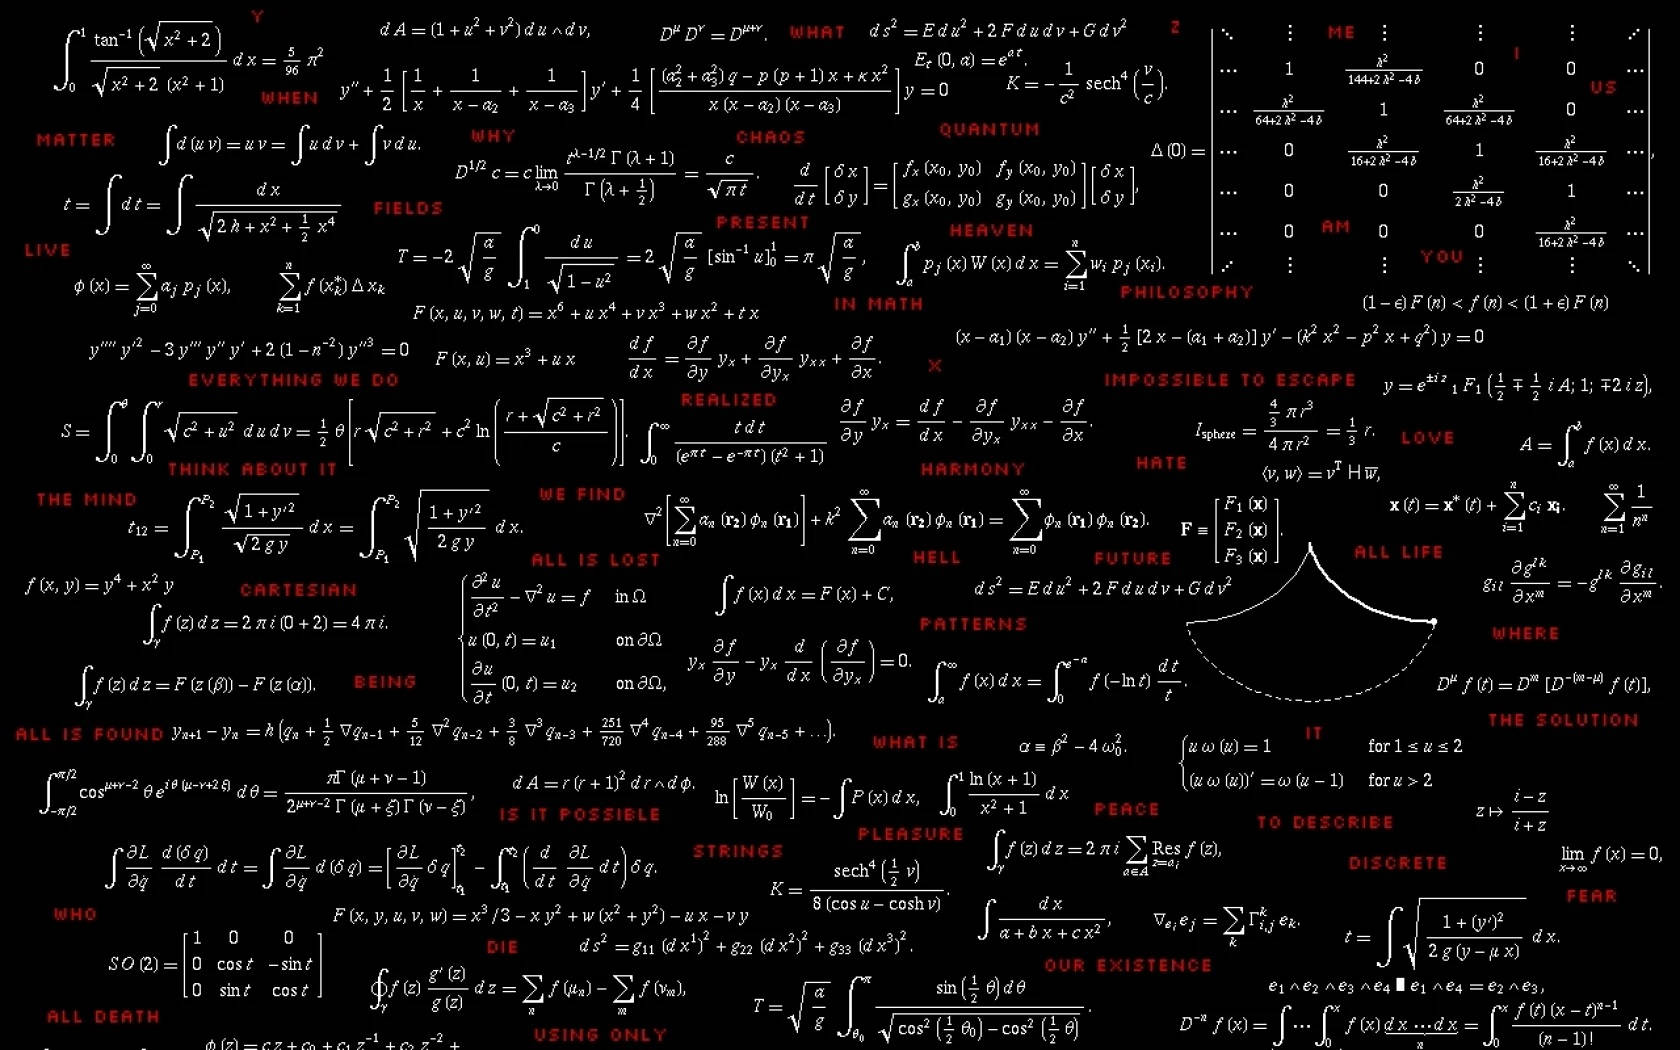 Free Math Wallpaper Downloads, [200+] Math Wallpapers for FREE | Wallpapers .com